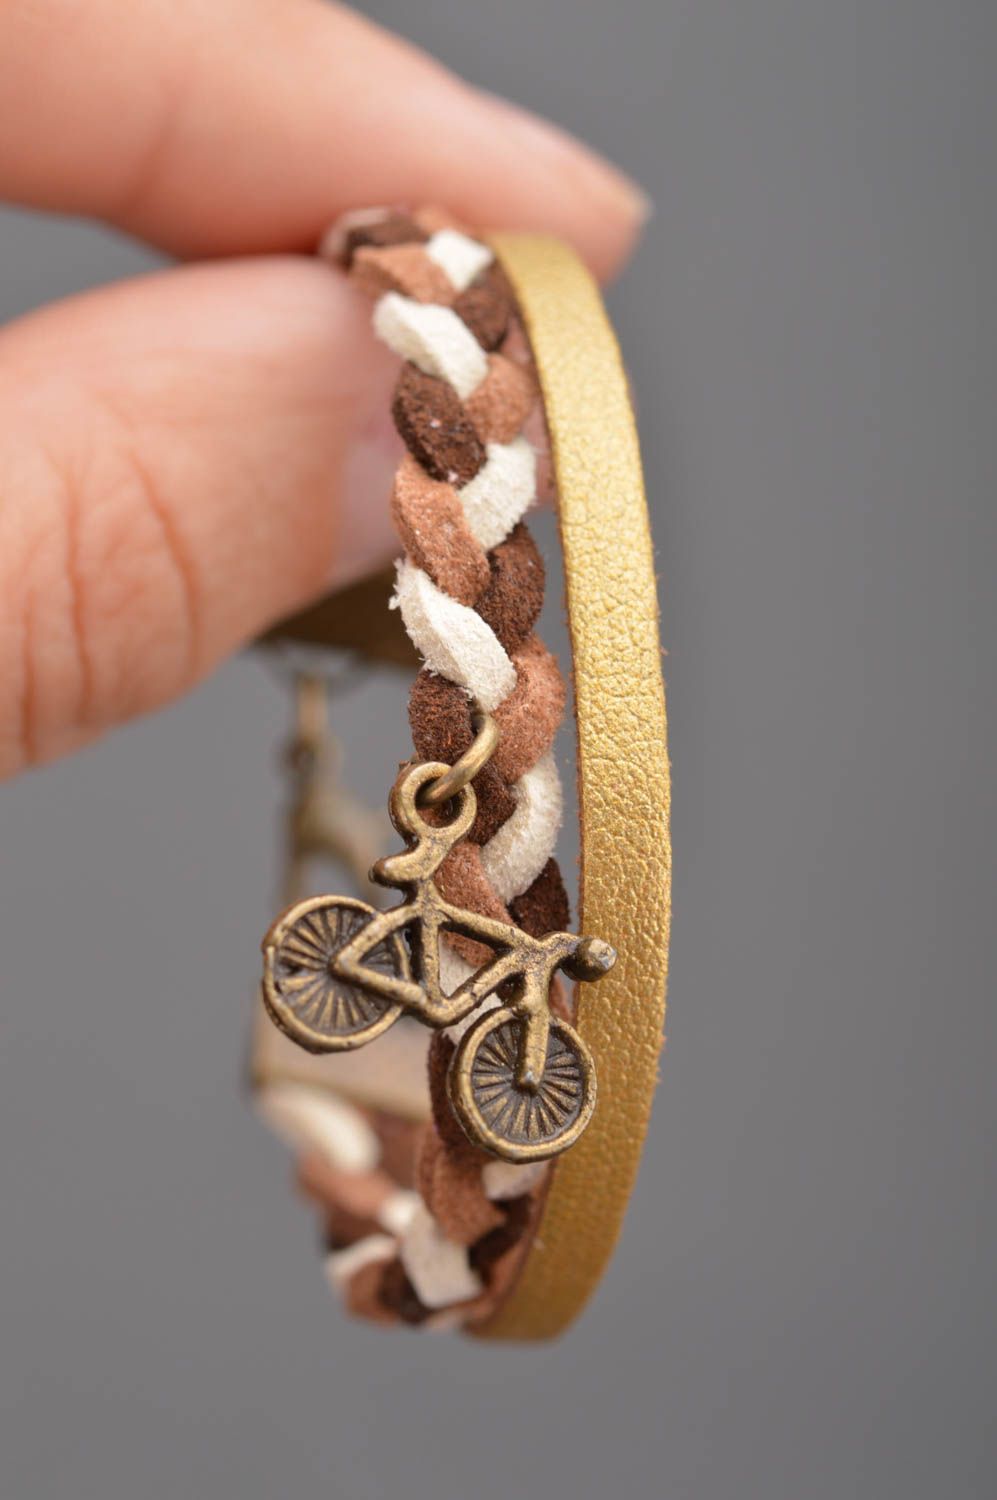 Handmade leather wrist bracelet with suede cord and metal charm Bicycle photo 2